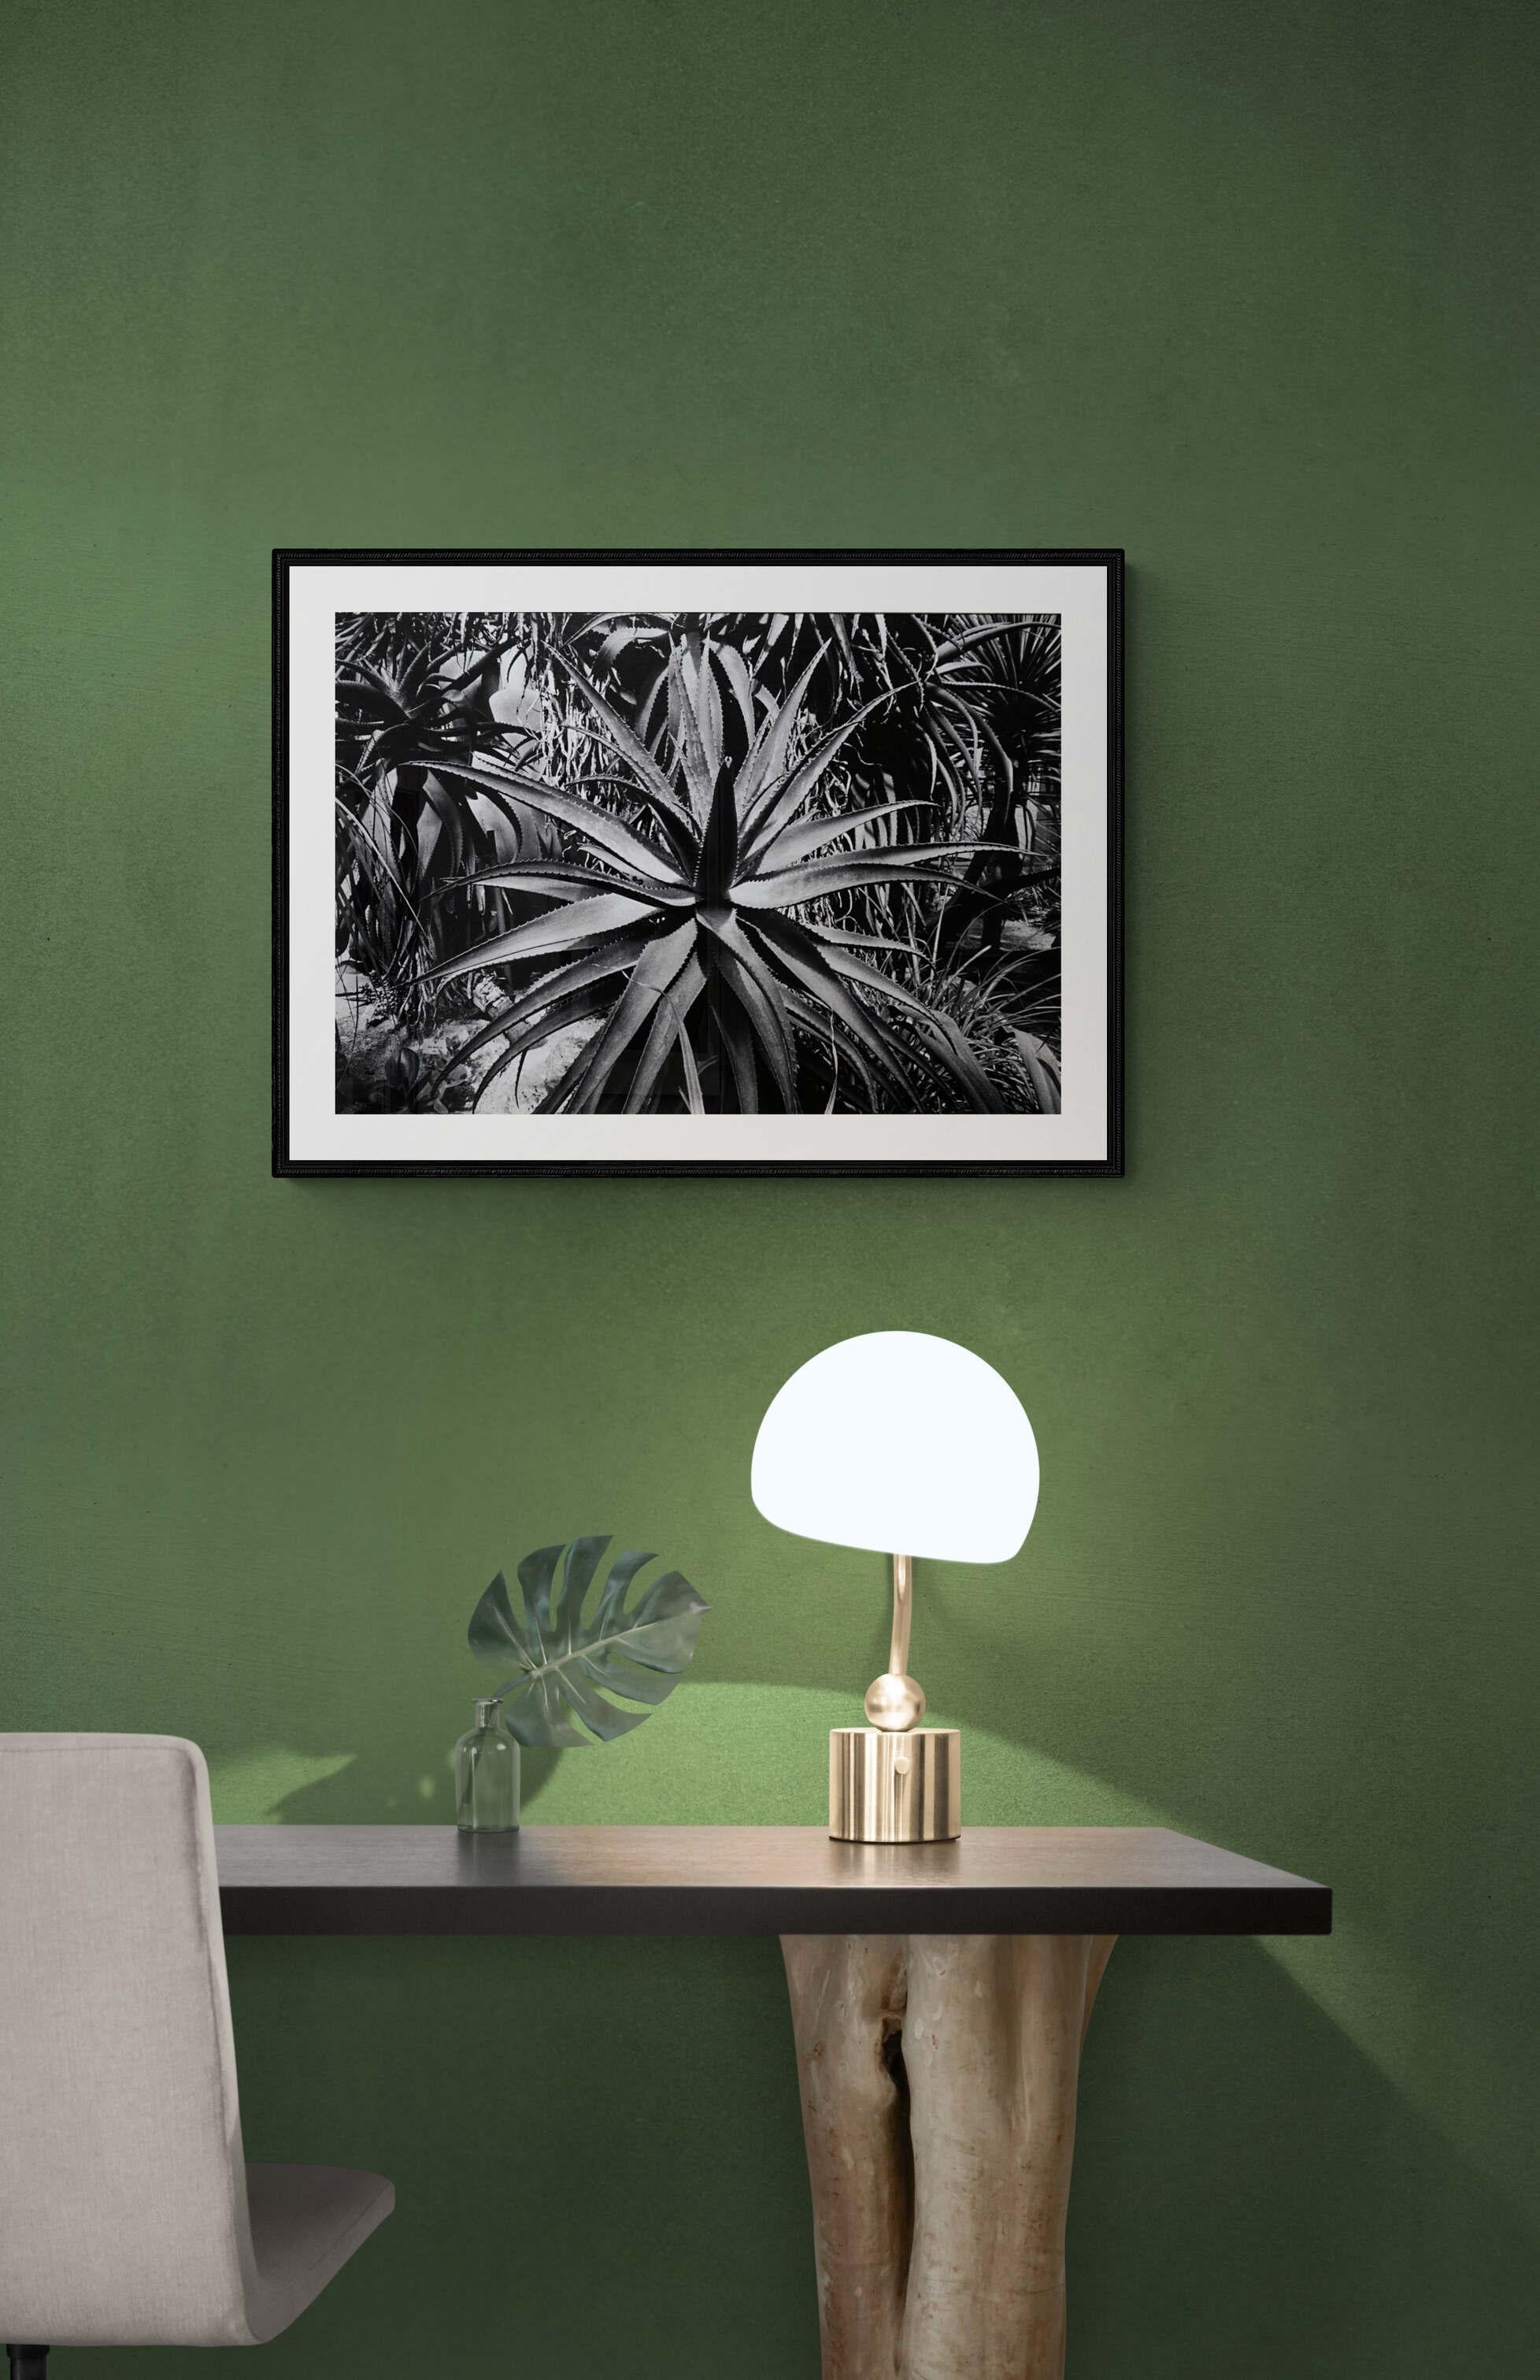 Artwork sold in perfect condition - Off-Print # 2 (Roma 1980) from the portfolio Garden 2 (Coffret Prestige # 9)
This is a Minimalist framing & presentation of the artwork :
The Fine Art print on Baryta paper is mounted on a 2mm dibond plate and